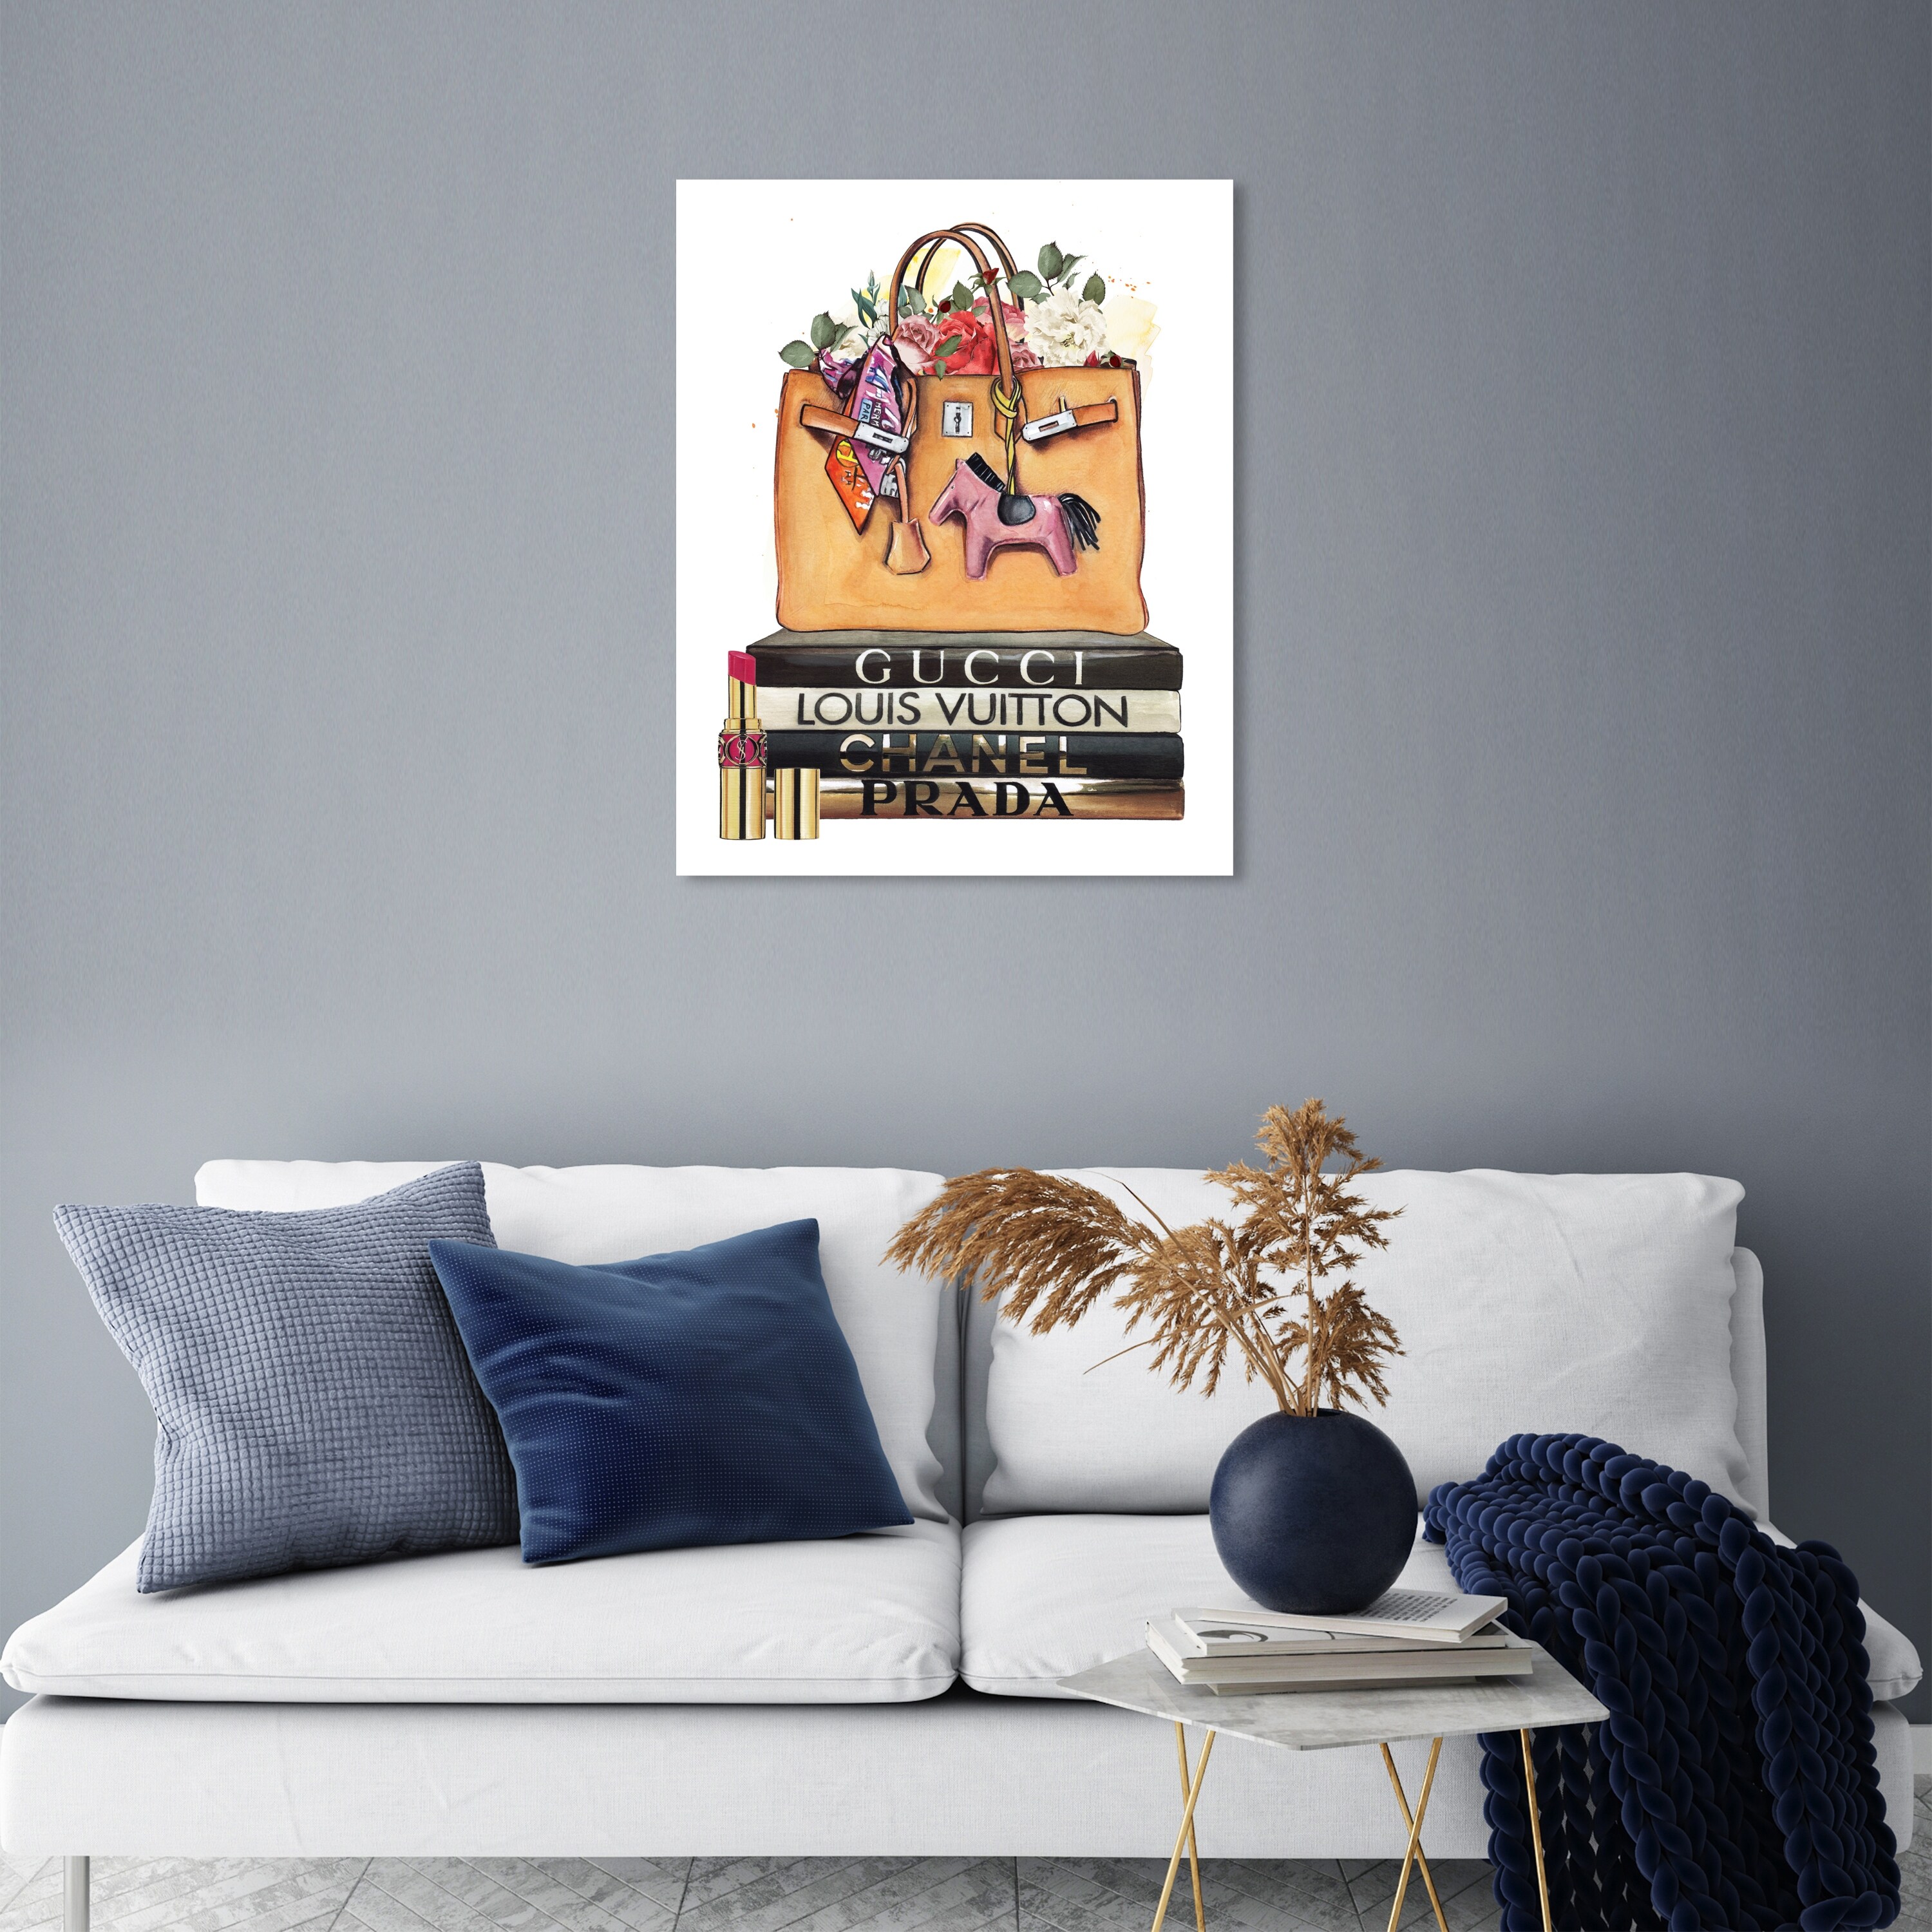 Oliver Gal 'Doll Memories - More than books' Orange Wall Art Canvas - Bed  Bath & Beyond - 34069399